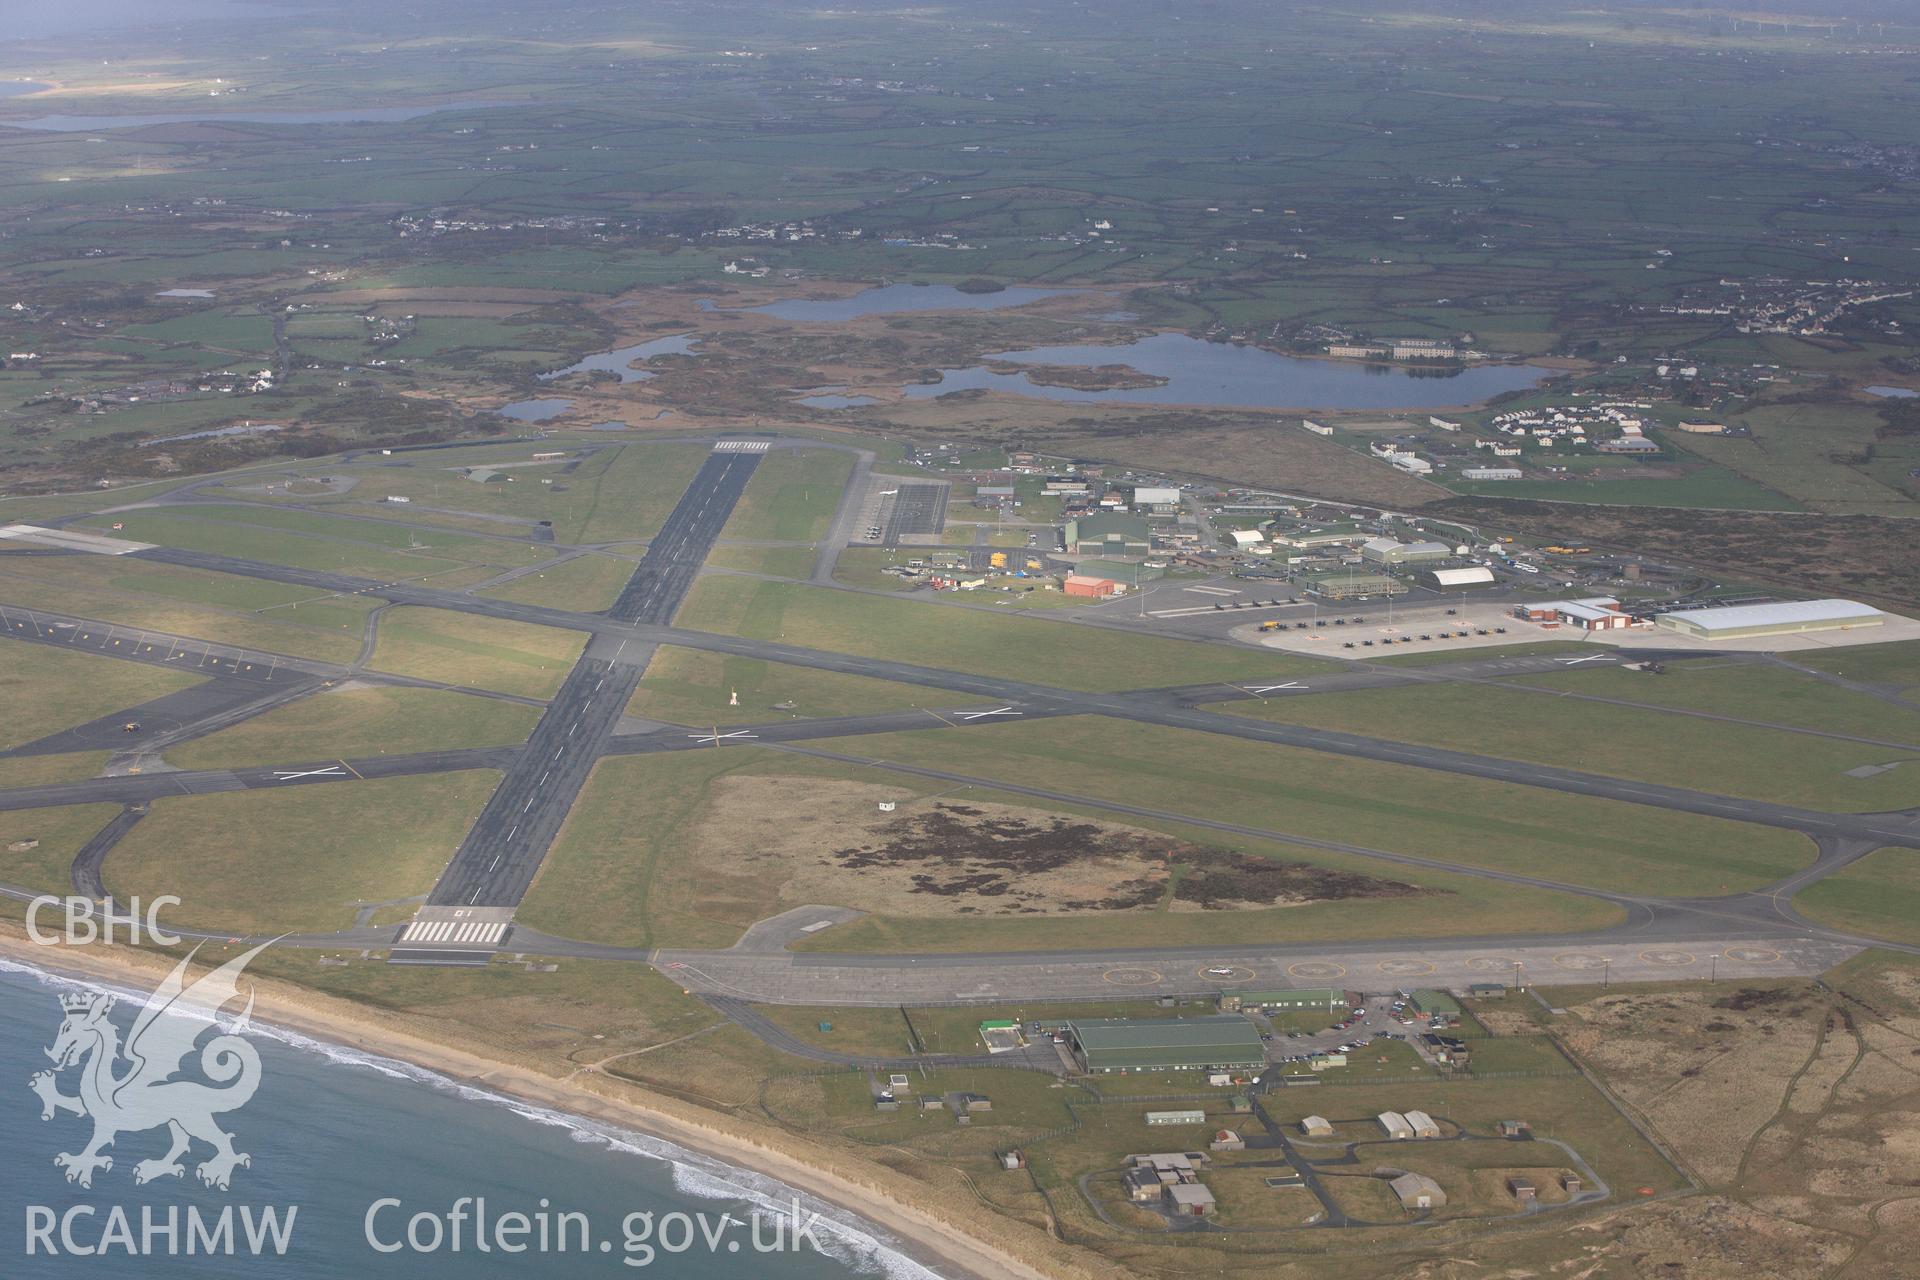 RCAHMW colour oblique photograph of RAF Valley, view from south-west. Taken by Toby Driver on 13/01/2012.